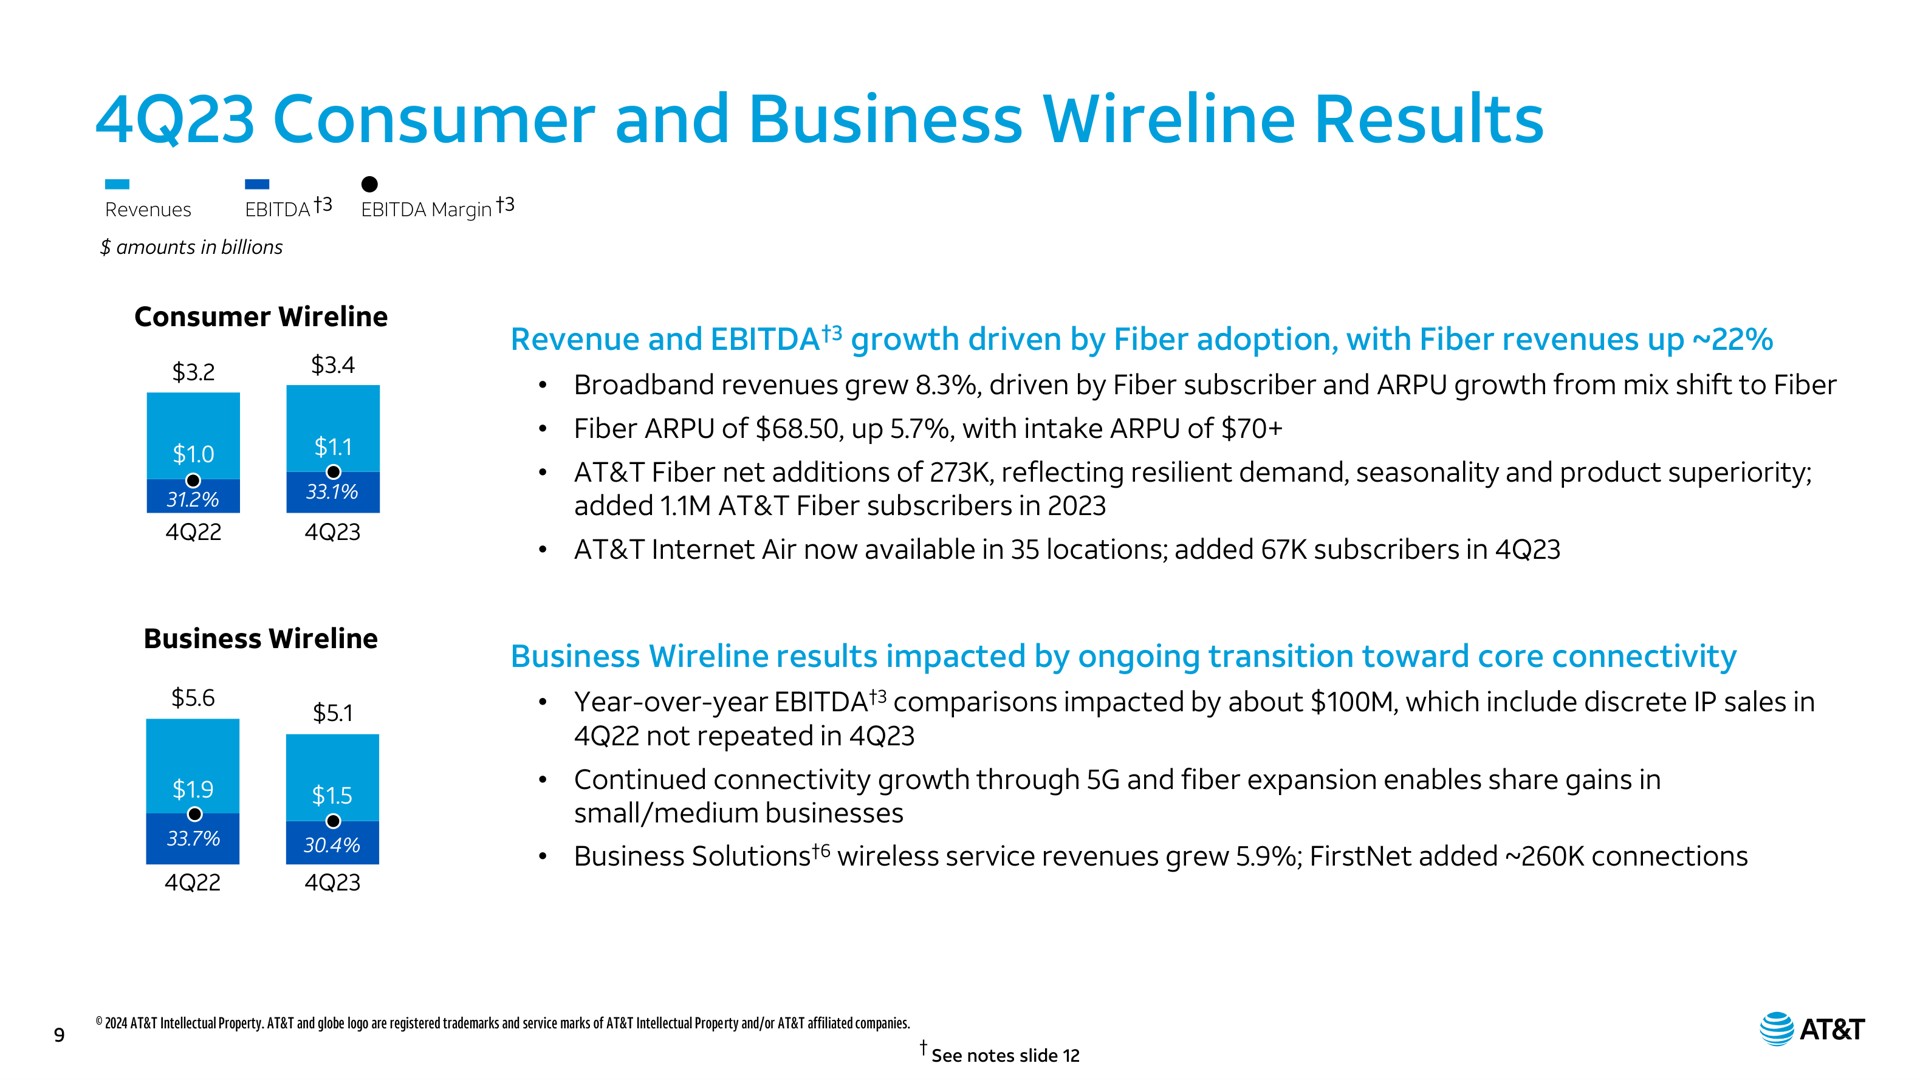 consumer and business results consumer business revenue and growth driven by fiber adoption with fiber revenues up revenues grew driven by fiber subscriber and growth from mix shift to fiber fiber of up with intake of at fiber net additions of reflecting resilient demand seasonality and product superiority added at fiber subscribers in at air now available in locations added subscribers in business results impacted by ongoing transition toward core connectivity year over year comparisons impacted by about which include discrete sales in not repeated in continued connectivity growth through and fiber expansion enables share gains in small medium businesses business solutions wireless service revenues grew added connections no | AT&T